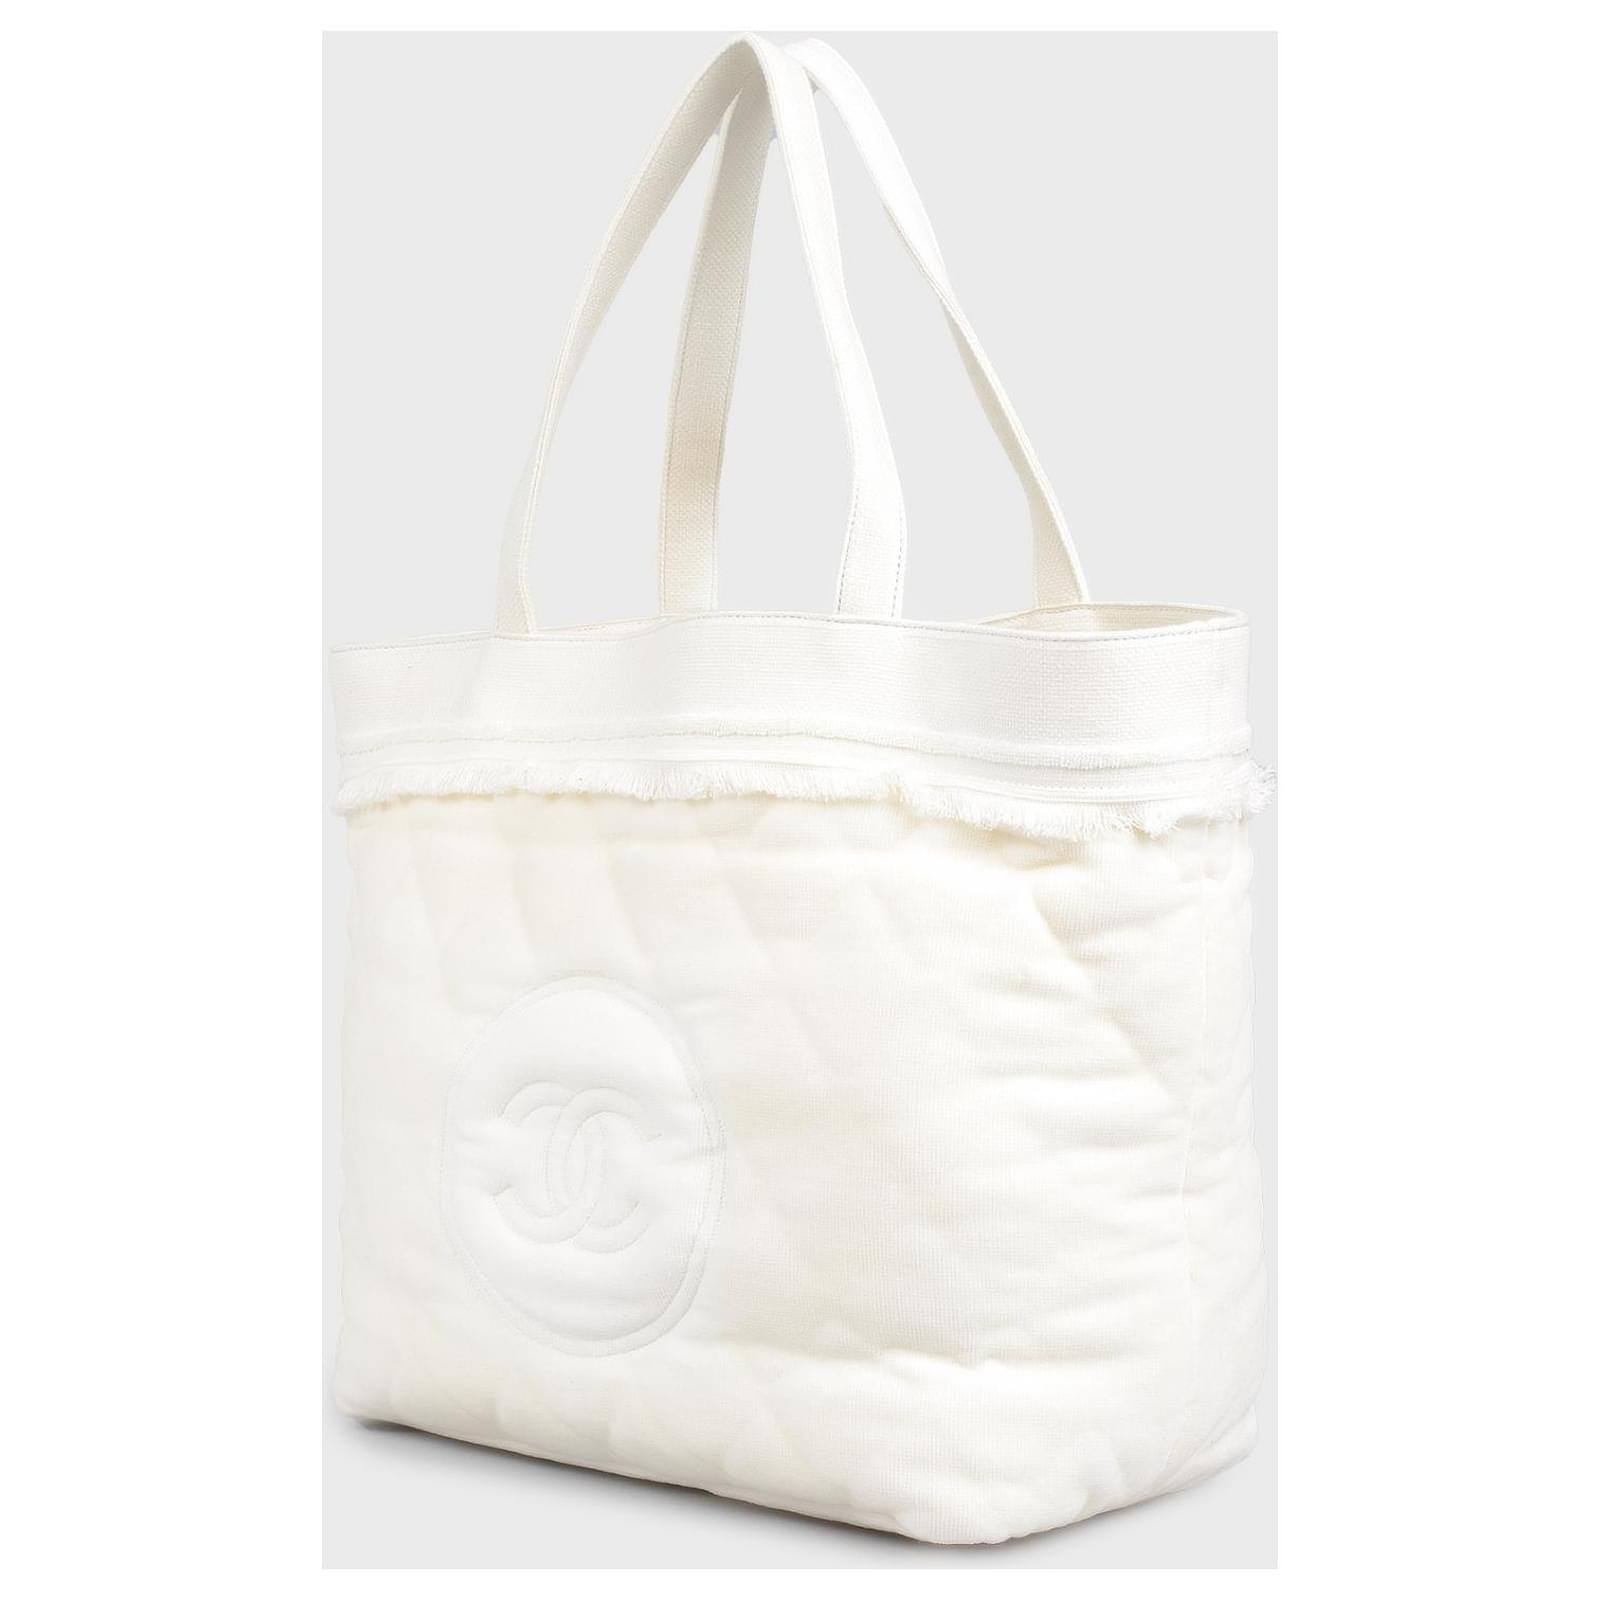 Chanel Shopping Top Handle Tote Cotton Beach Black and White Terry Cloth Bag